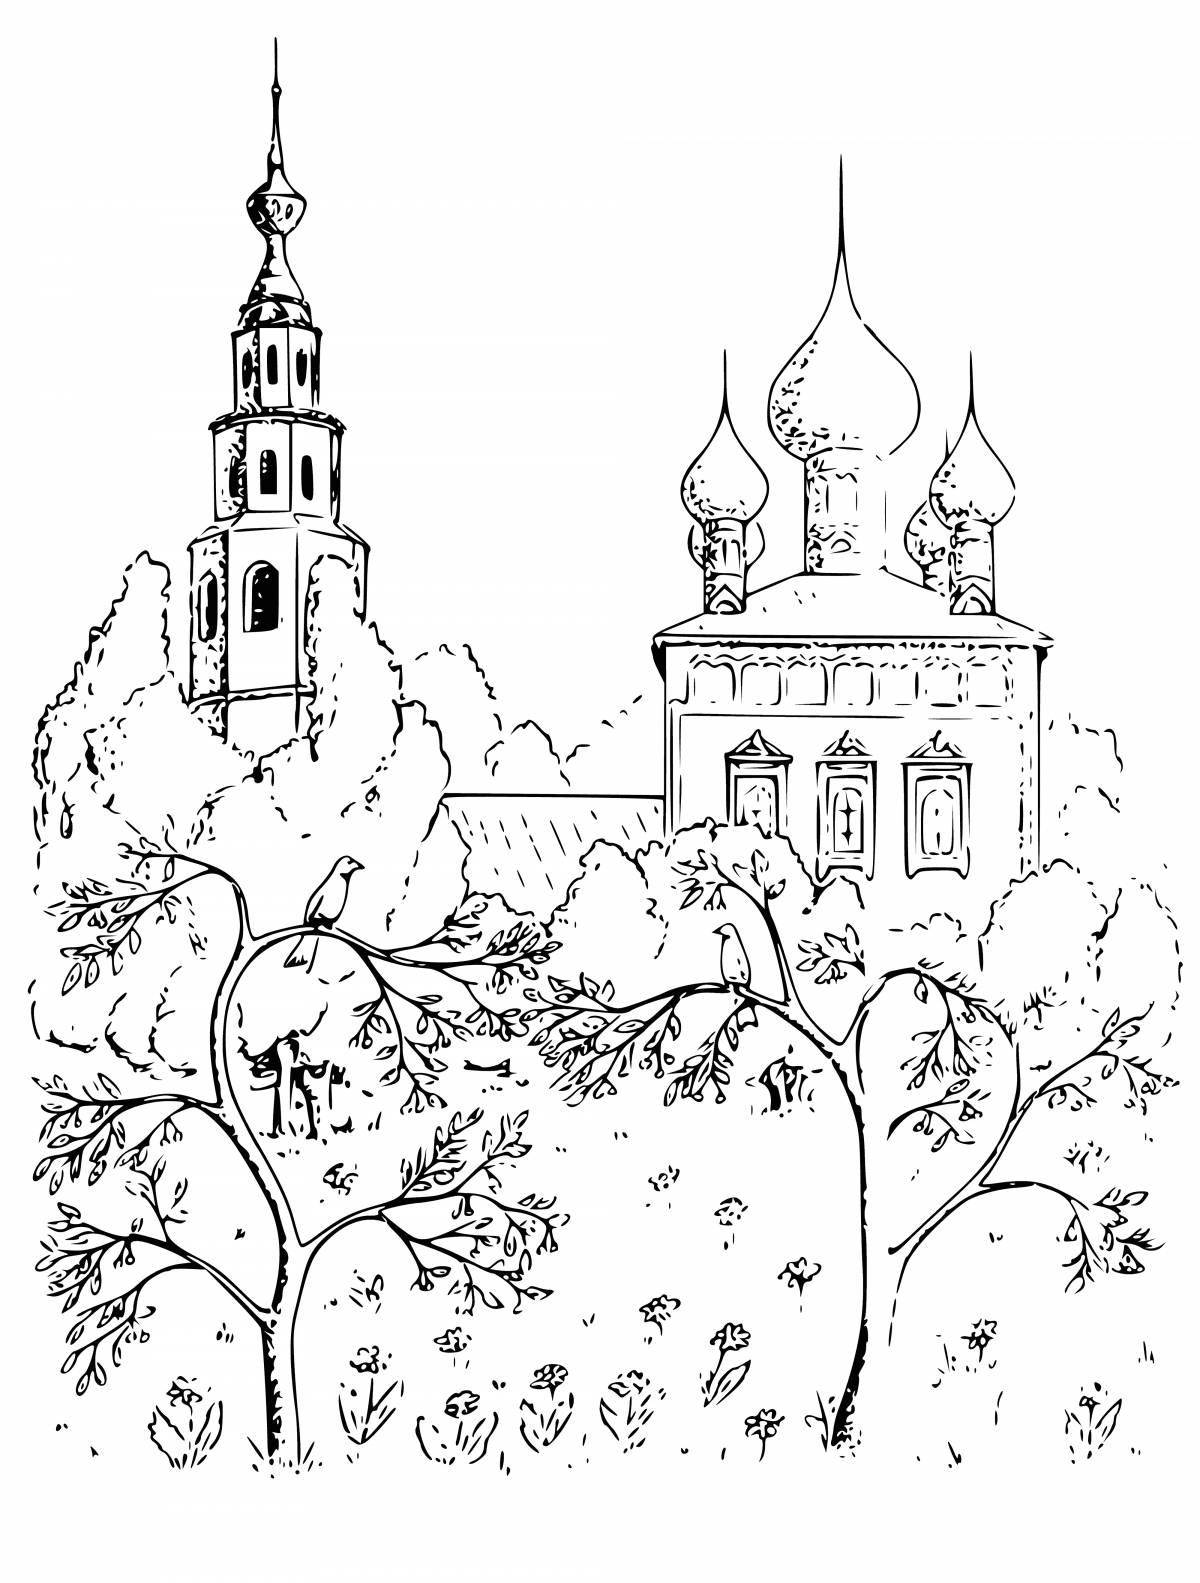 Impressive coloring pages of temples and churches for children